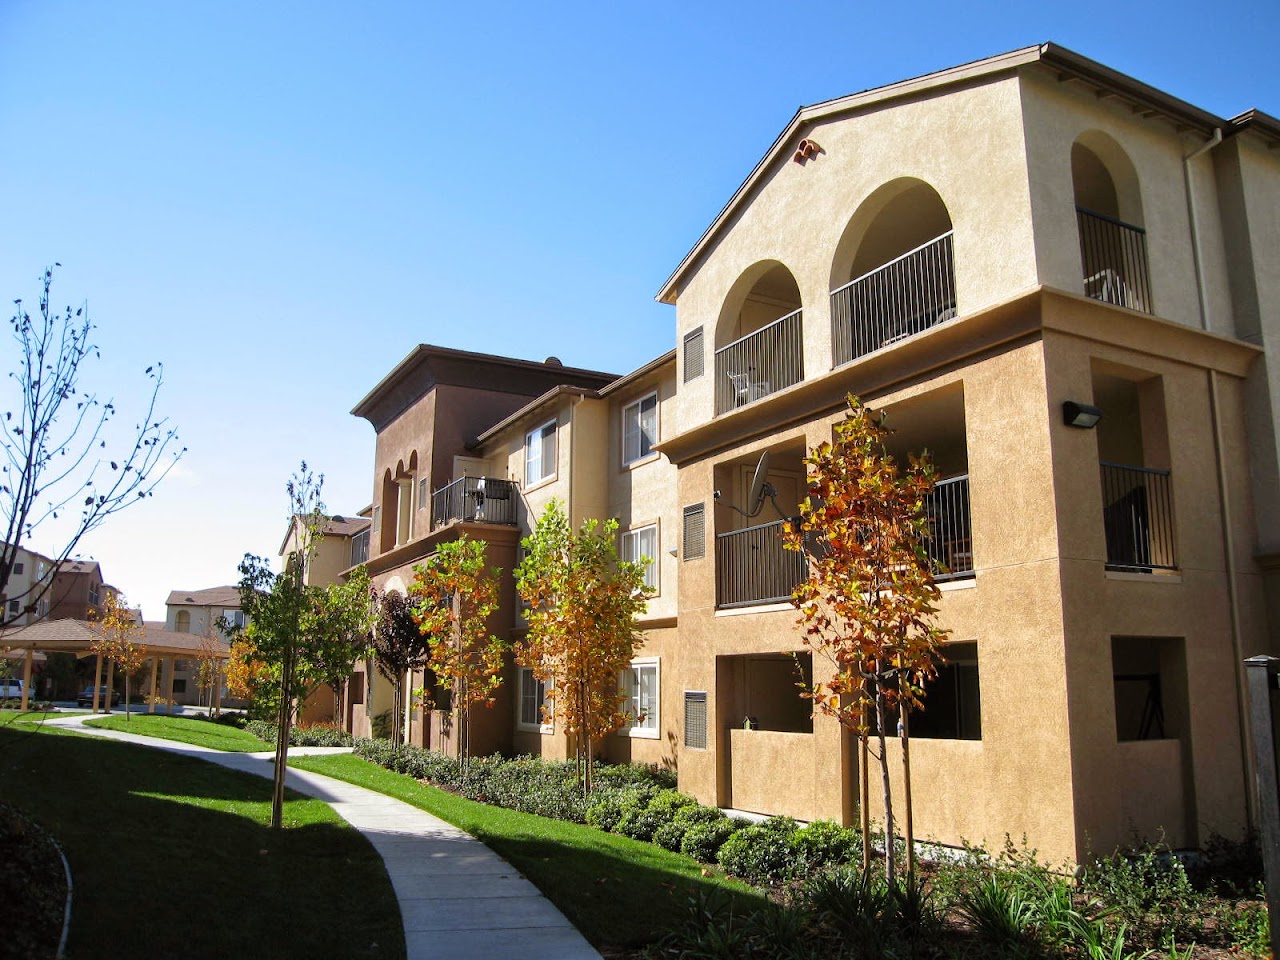 Photo of MUIRLANDS AT WINDEMERE APTS at 1108 CRESTFIELD DR SAN RAMON, CA 94582